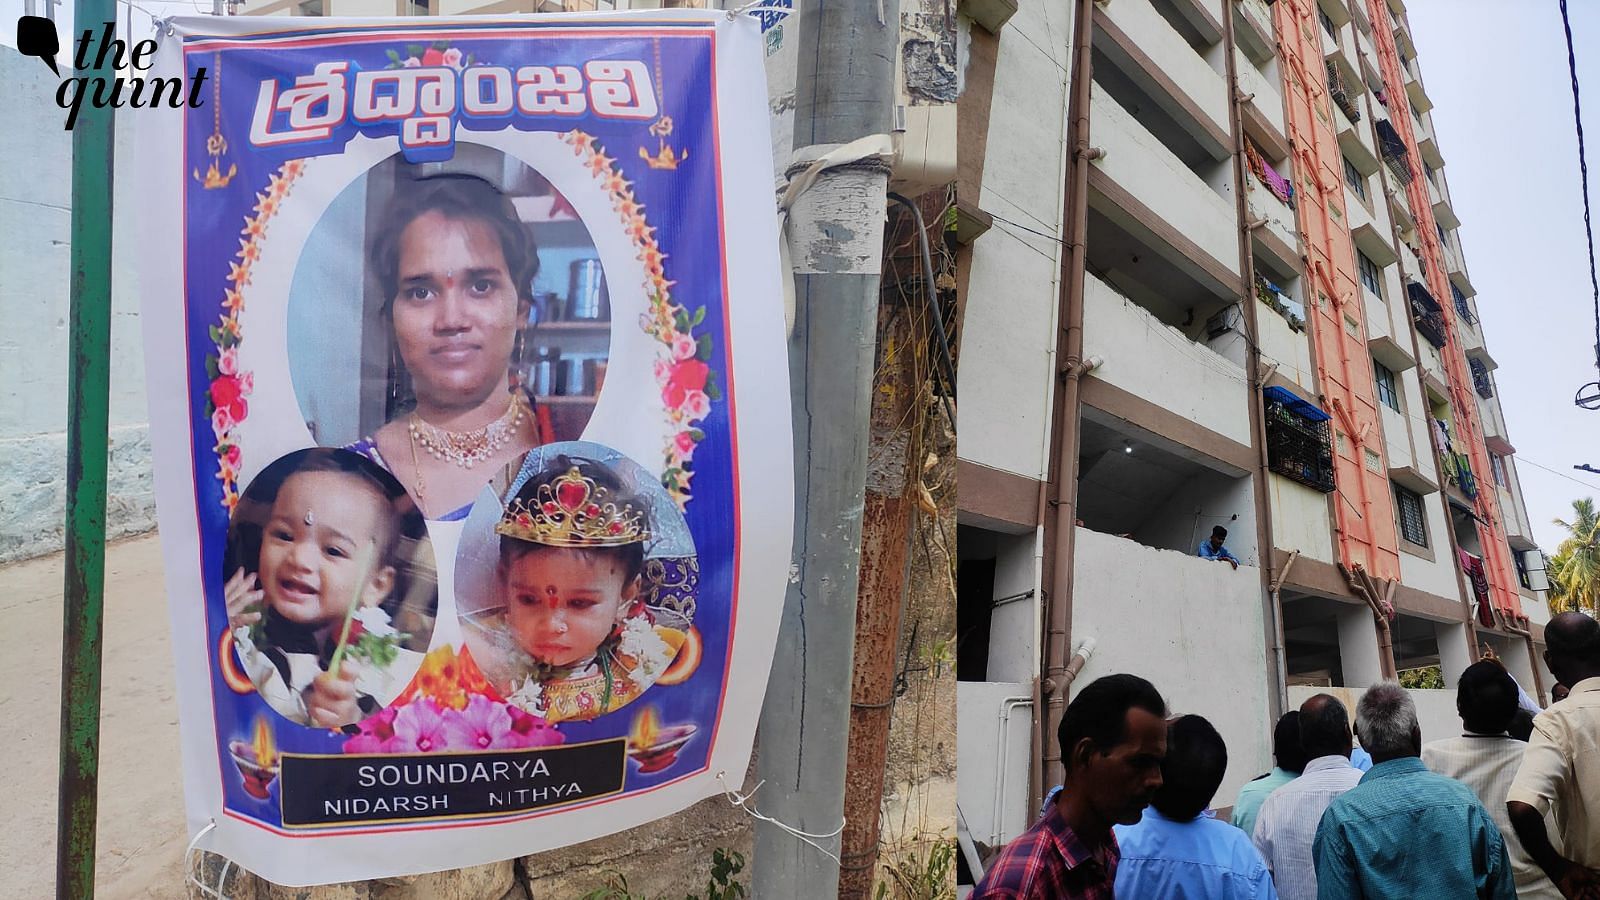 <div class="paragraphs"><p>Allegedly harassed over dowry by her husband G Ganesh and her in-laws, 27-year-old Soundarya jumped to death from the eighth floor of the building after throwing her twin babies onto the ground on Monday afternoon, said Gandhi Nagar Police.</p></div>